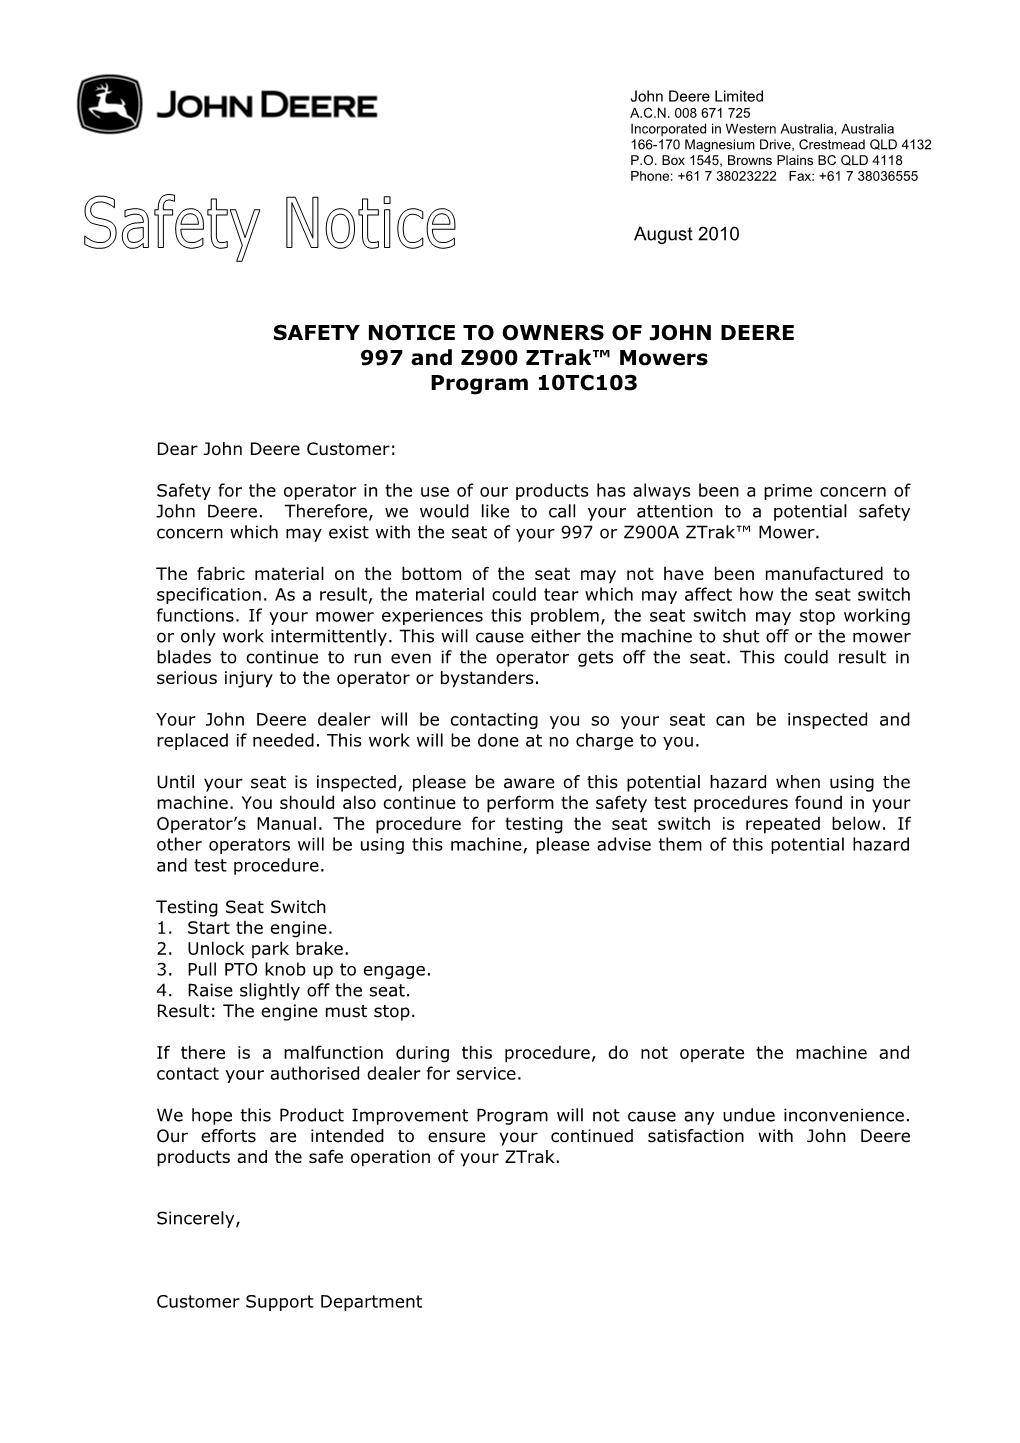 Safety Notice to Owners of John Deere